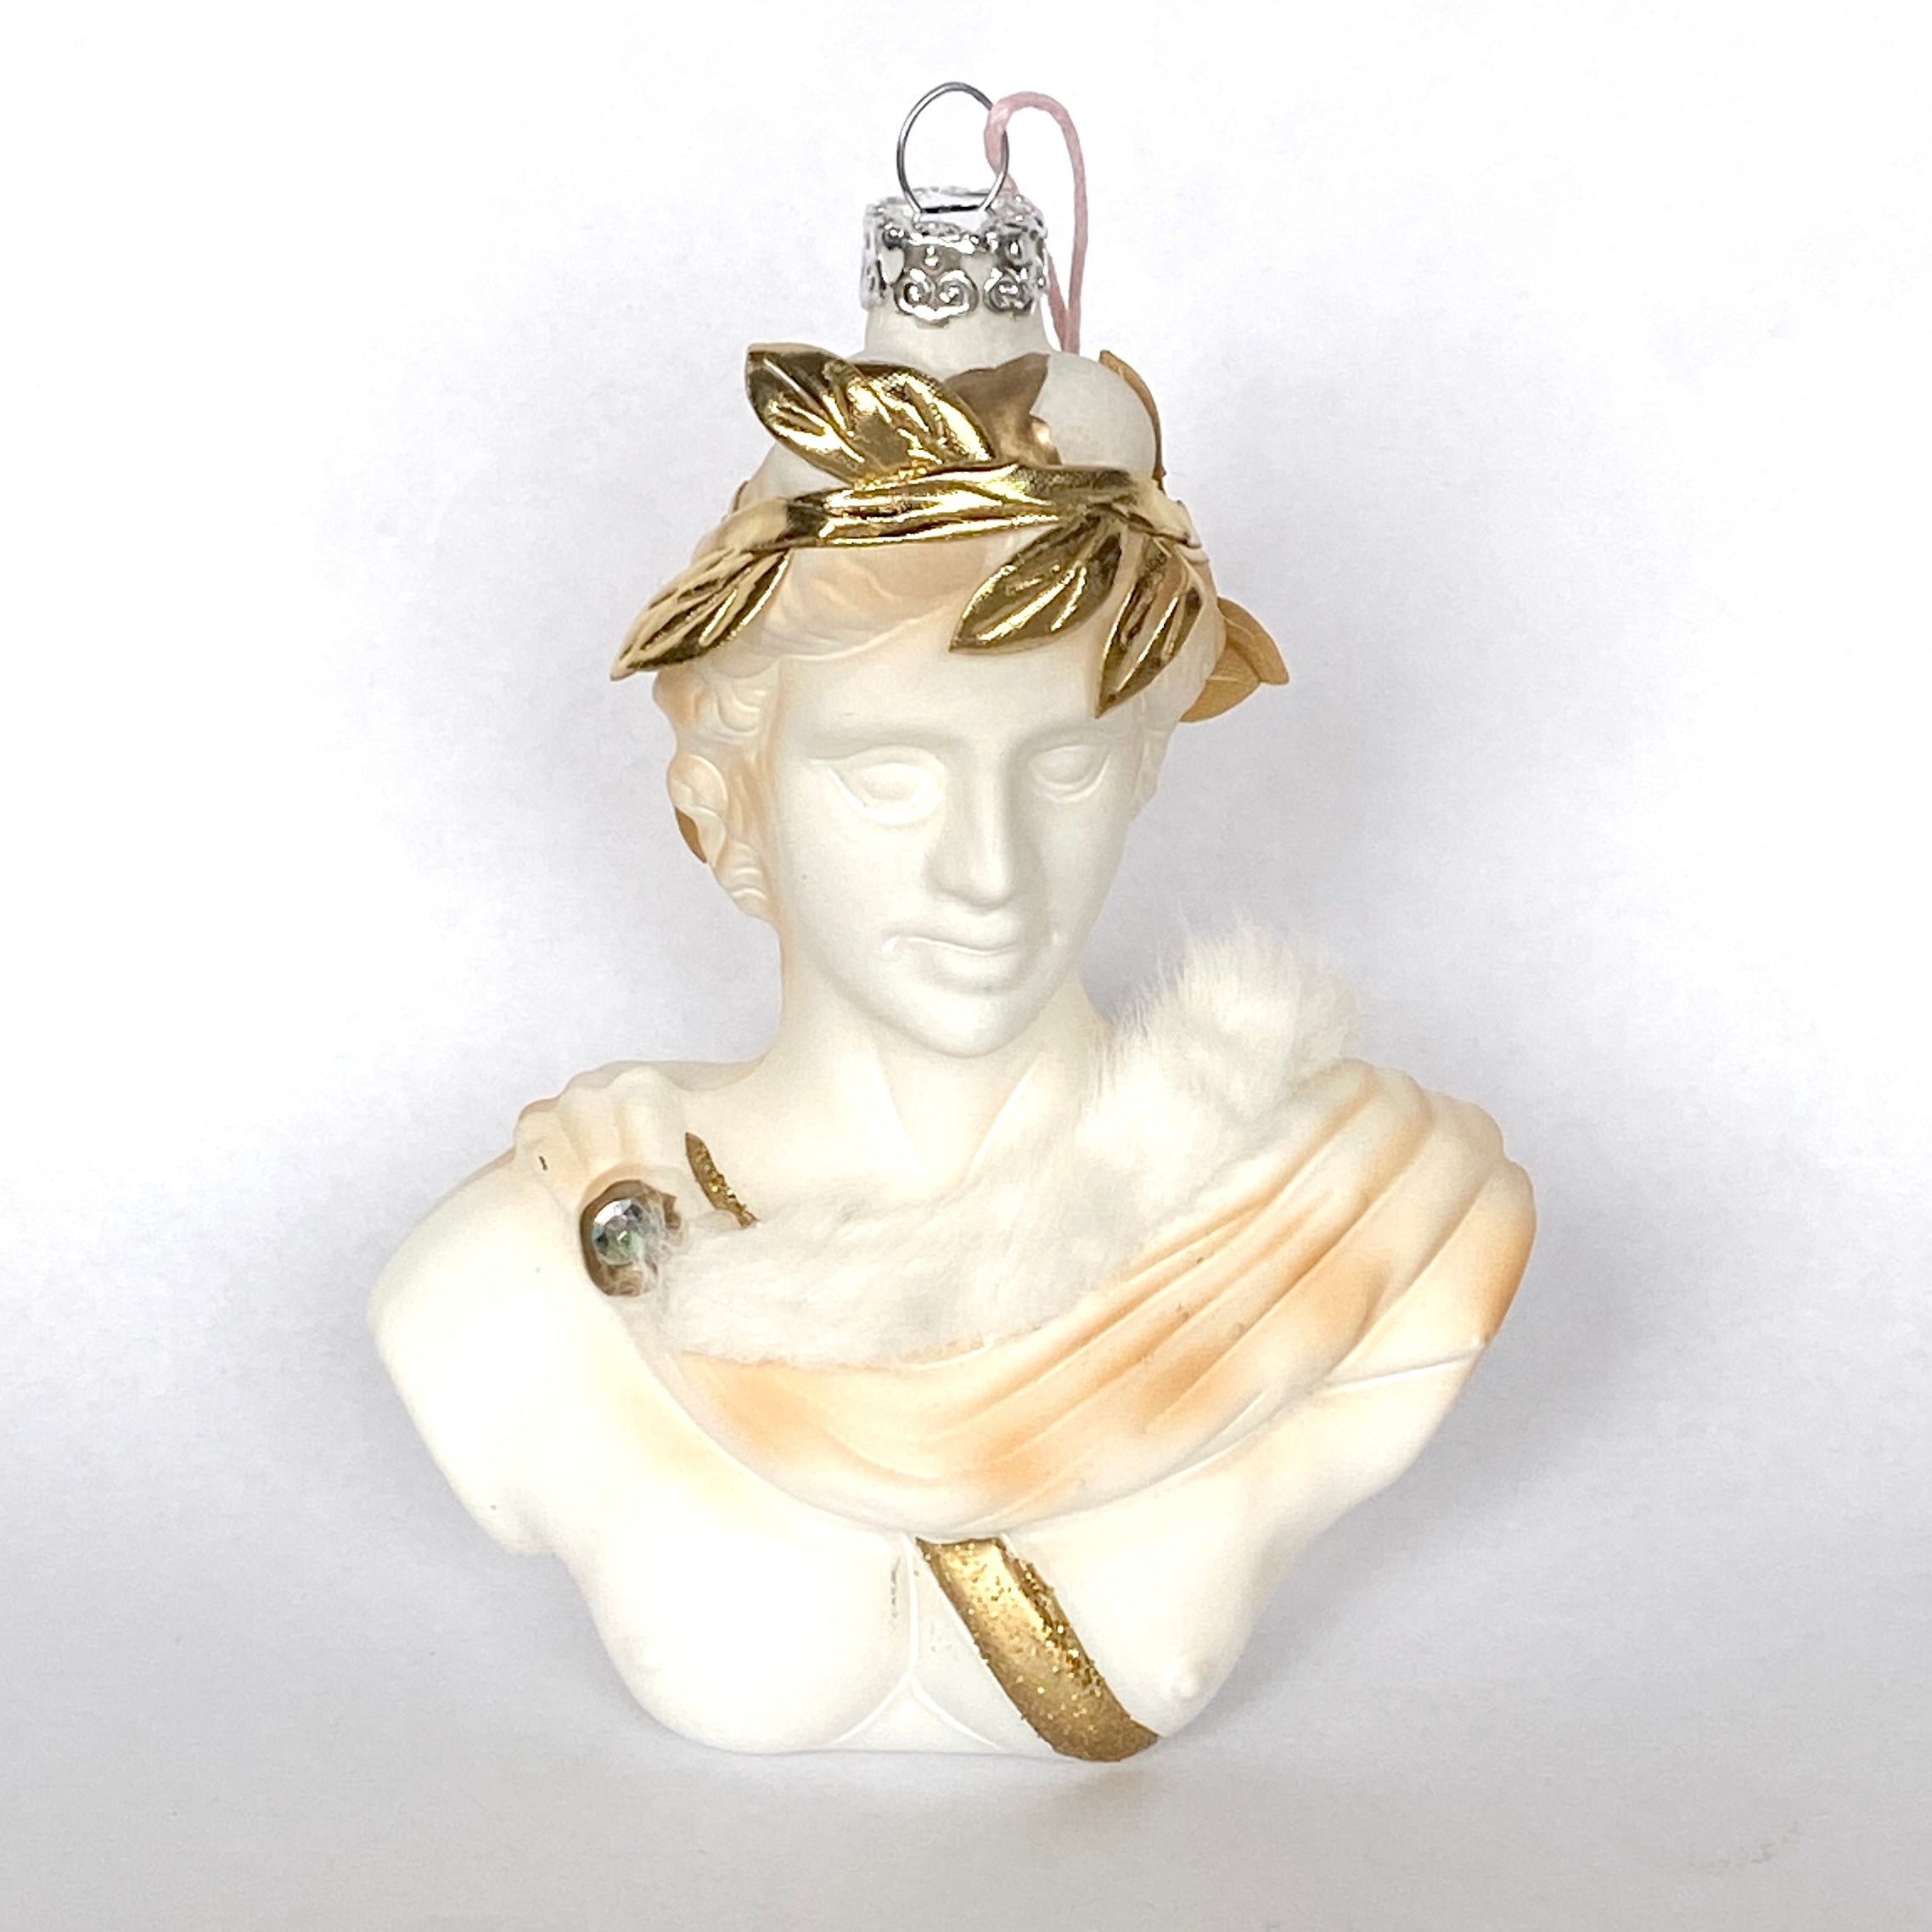 Glass ornament of the god Apollo - available at scouthouse.com.au